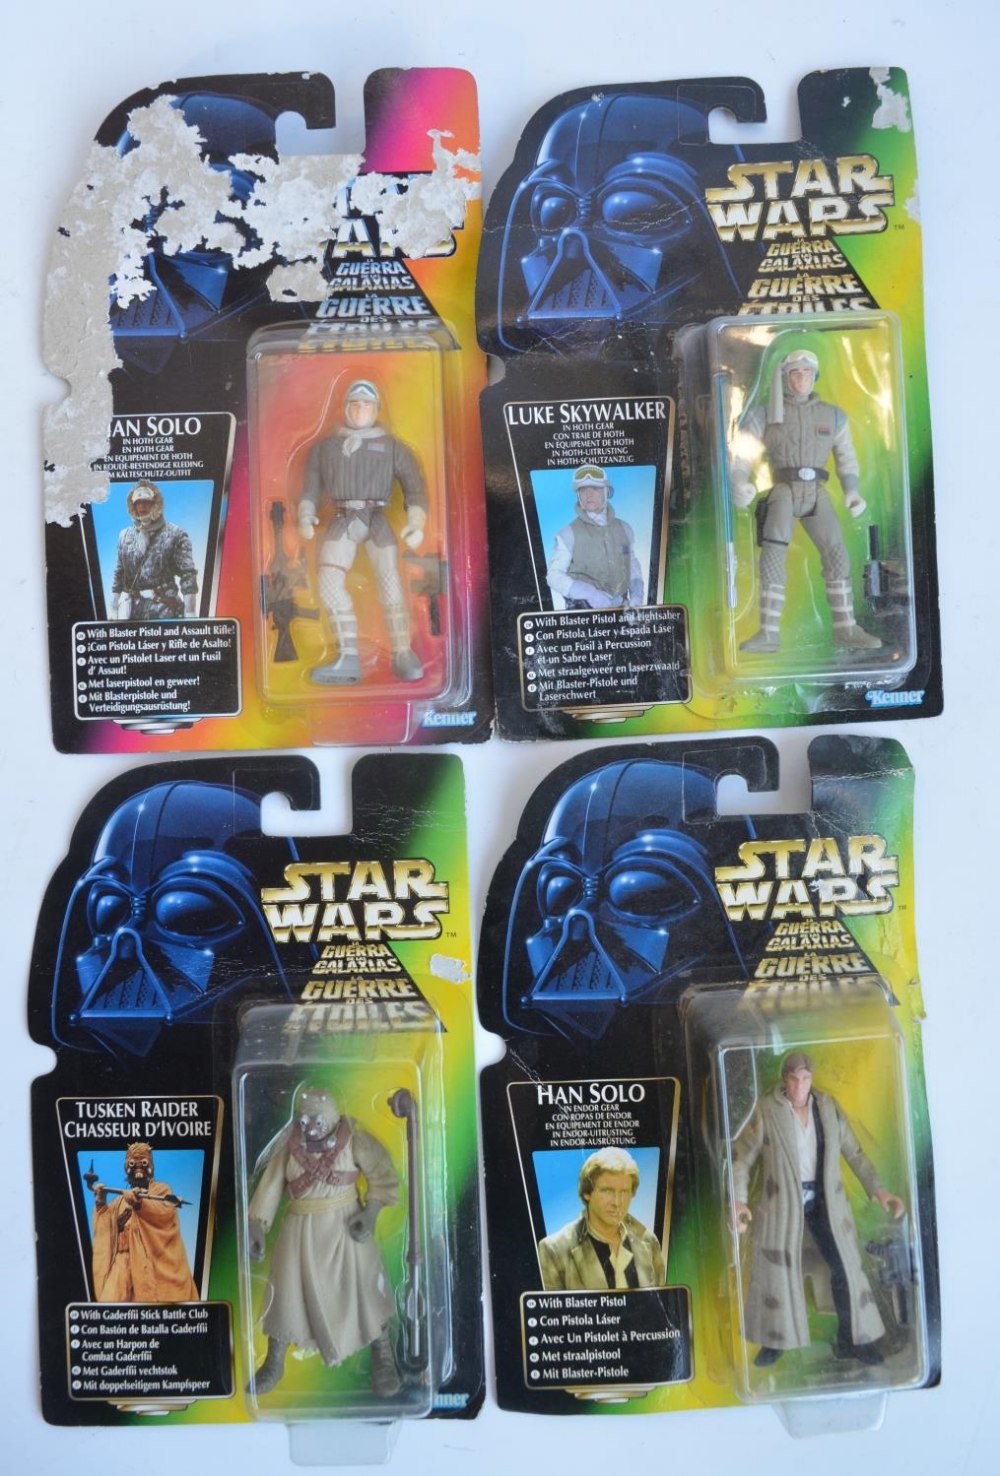 Collection of Star Wars action figures and play sets from Kenner to include 2 figure Shadows Of - Image 2 of 11